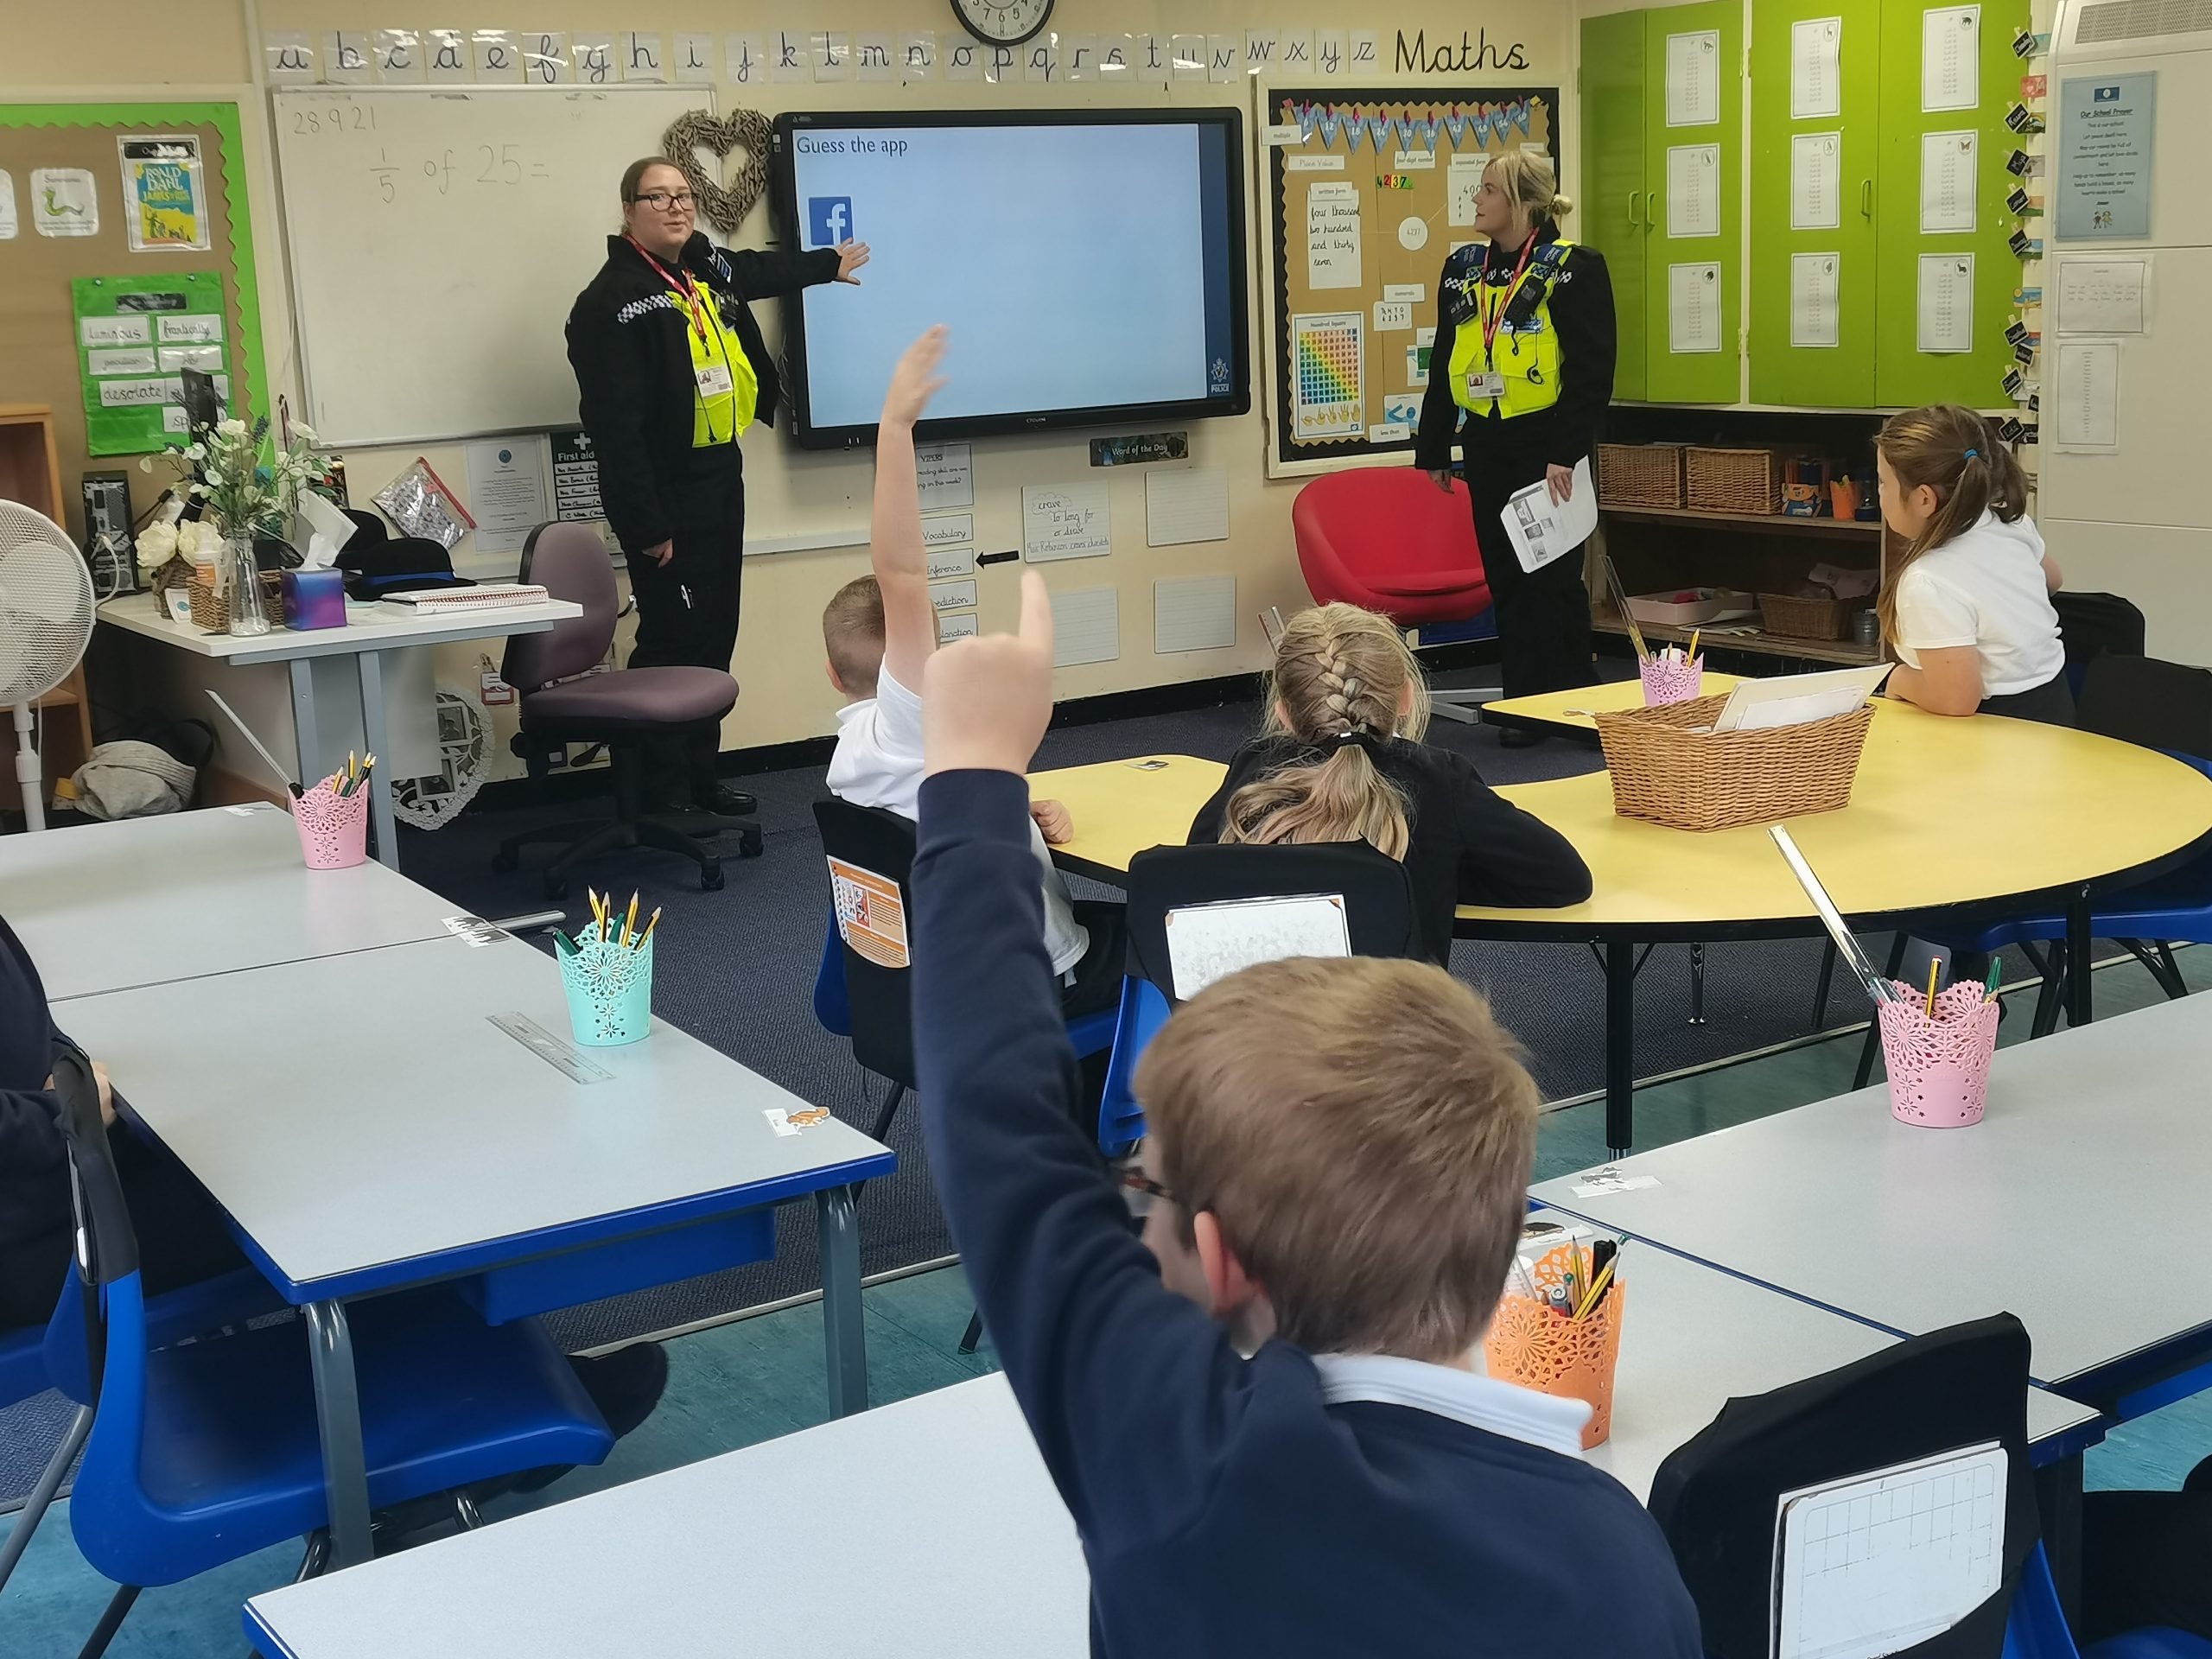 Class 10's visit from the police